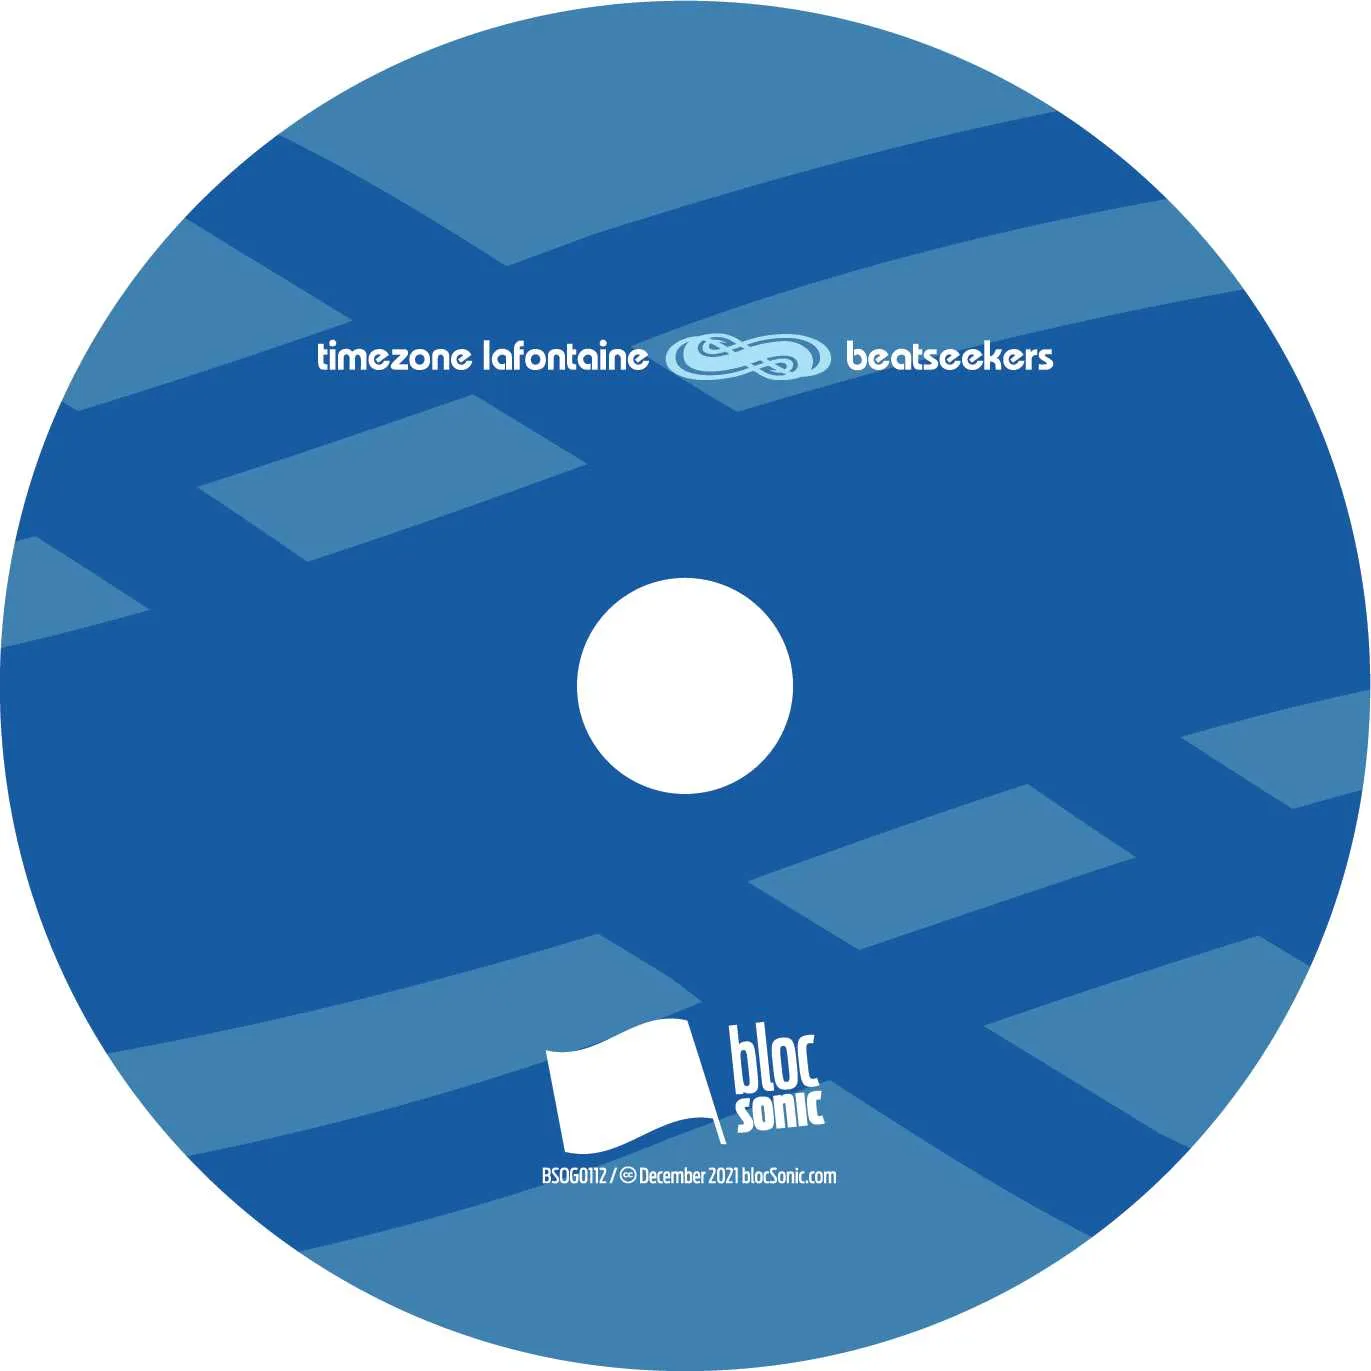 Album disc for “Beatseekers” by Timezone Lafontaine